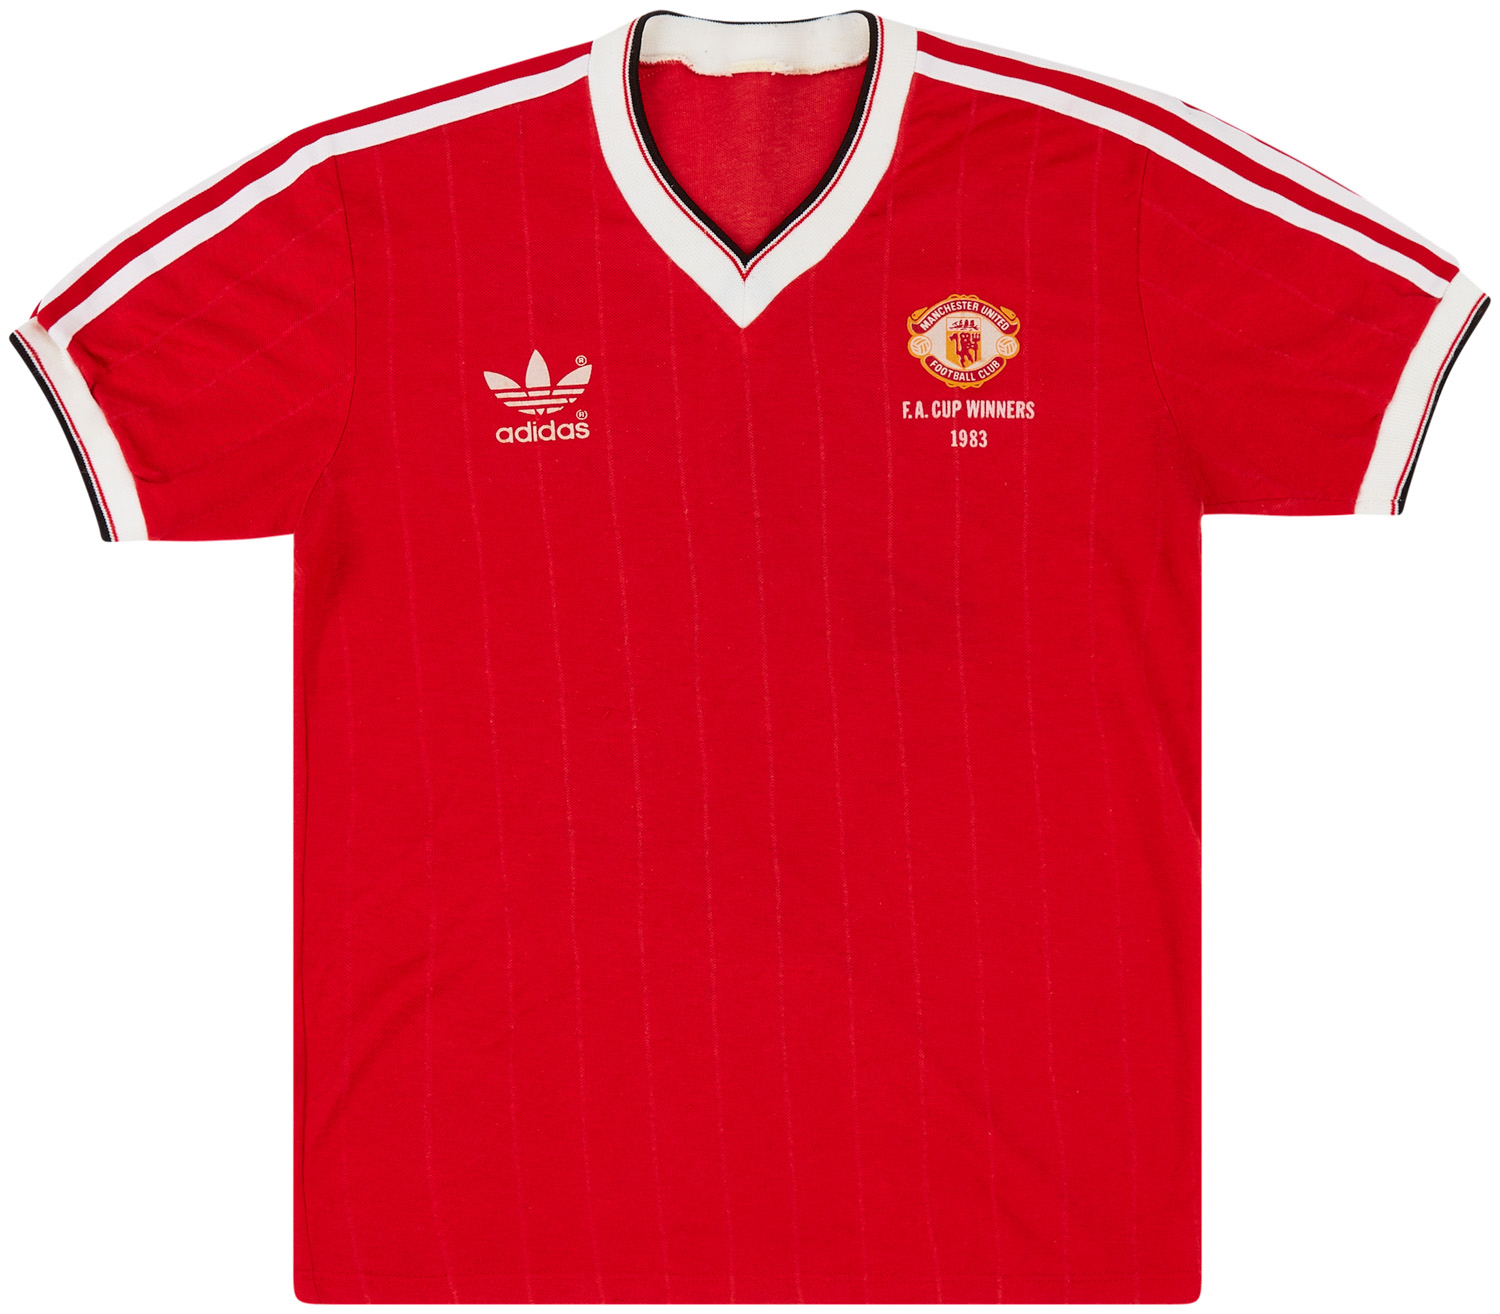 1983 Manchester United 'FA Cup Winners' Home Shirt